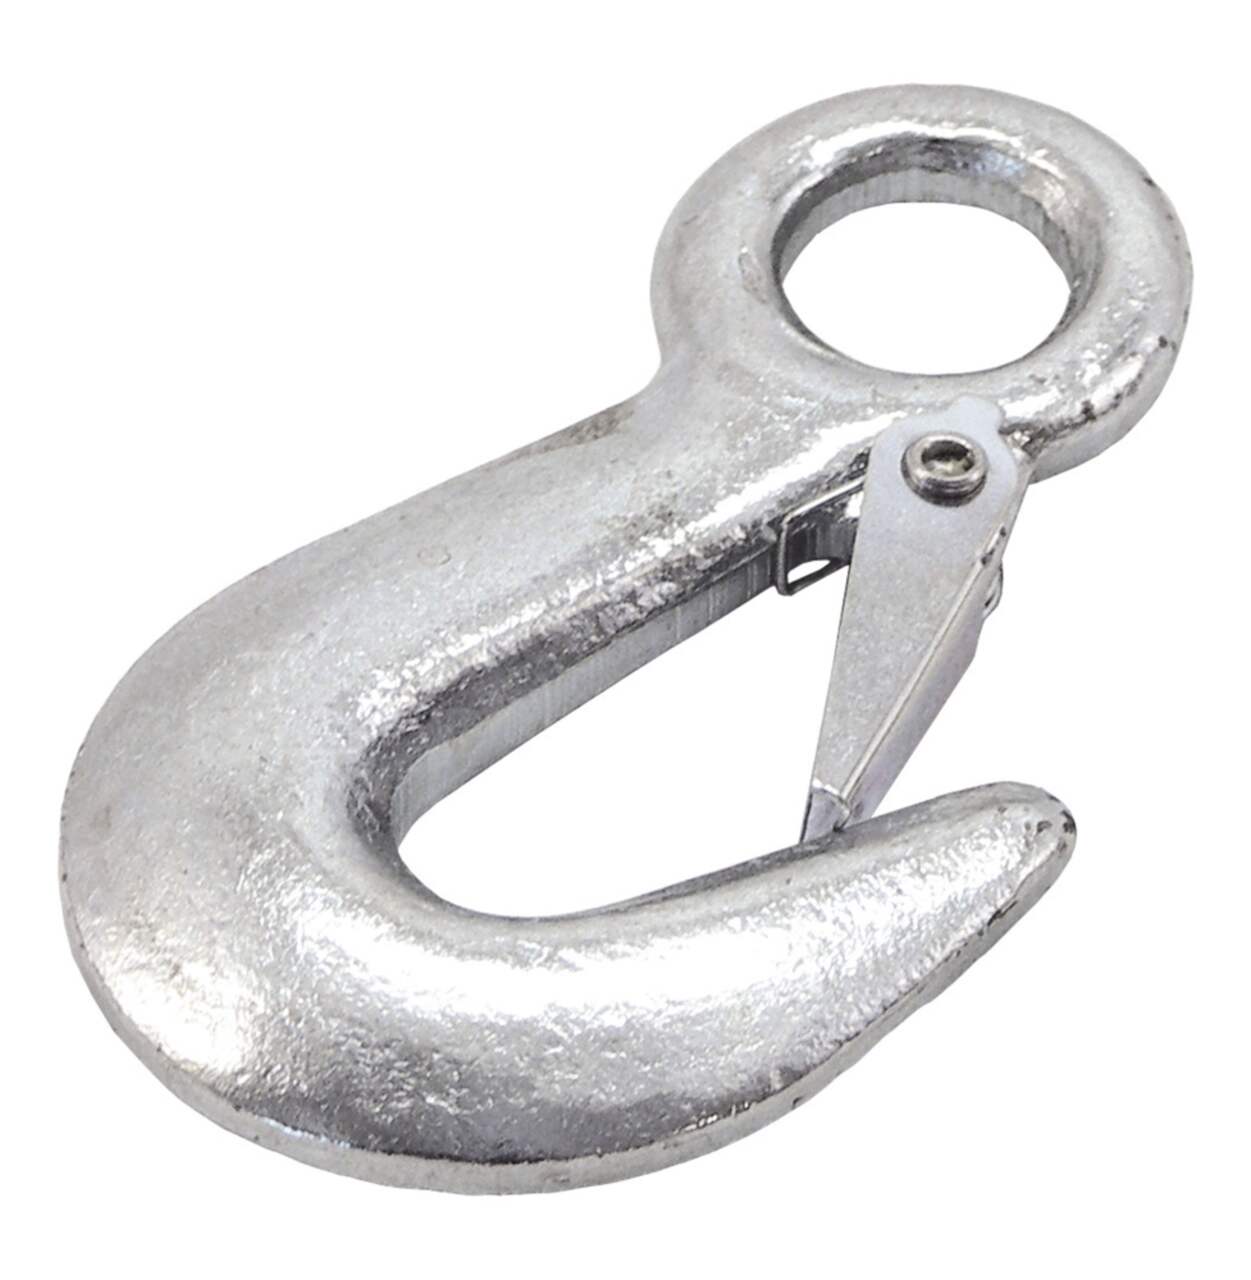 https://media-www.canadiantire.ca/product/playing/seasonal-recreation/marine-power-boating/0792410/trailer-hook-7-16-x-3-1-2-galvanized-d9706905-5115-4f62-a2da-3cd73054ea8d.png?imdensity=1&imwidth=640&impolicy=mZoom